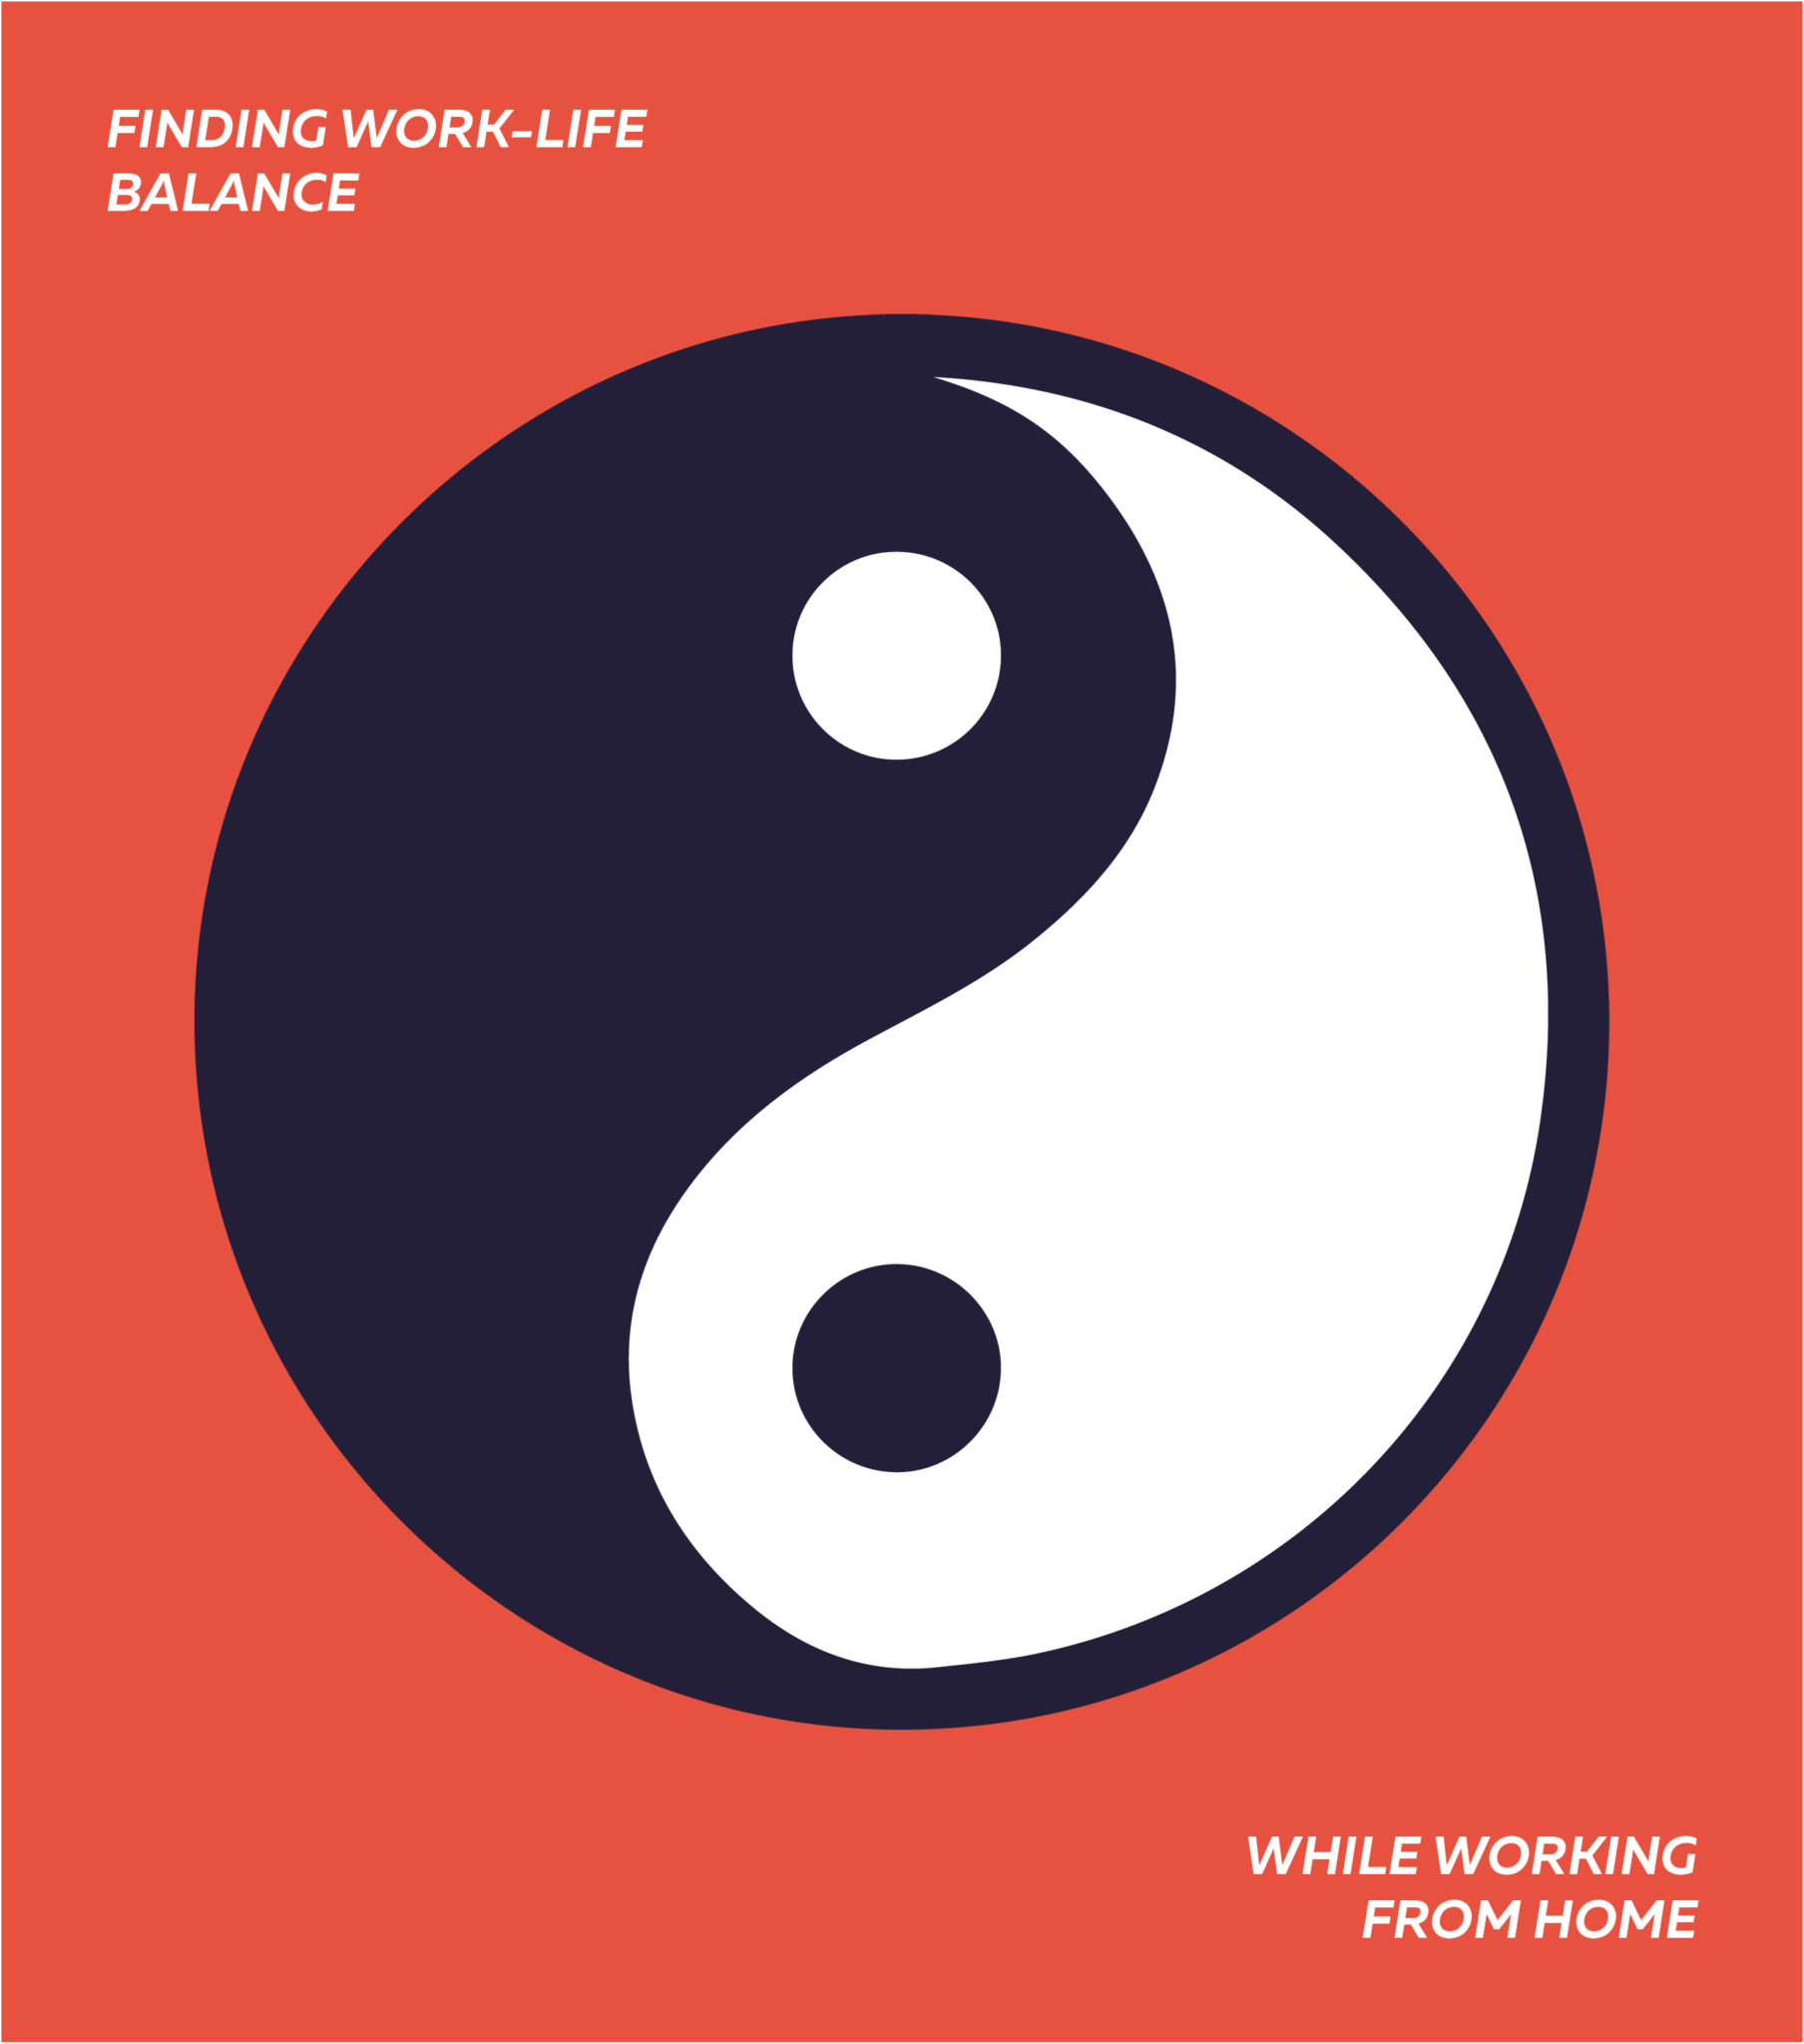 A graphic with a ying-yang sign against a red background with text Finding Work Life Balance While Working From Home